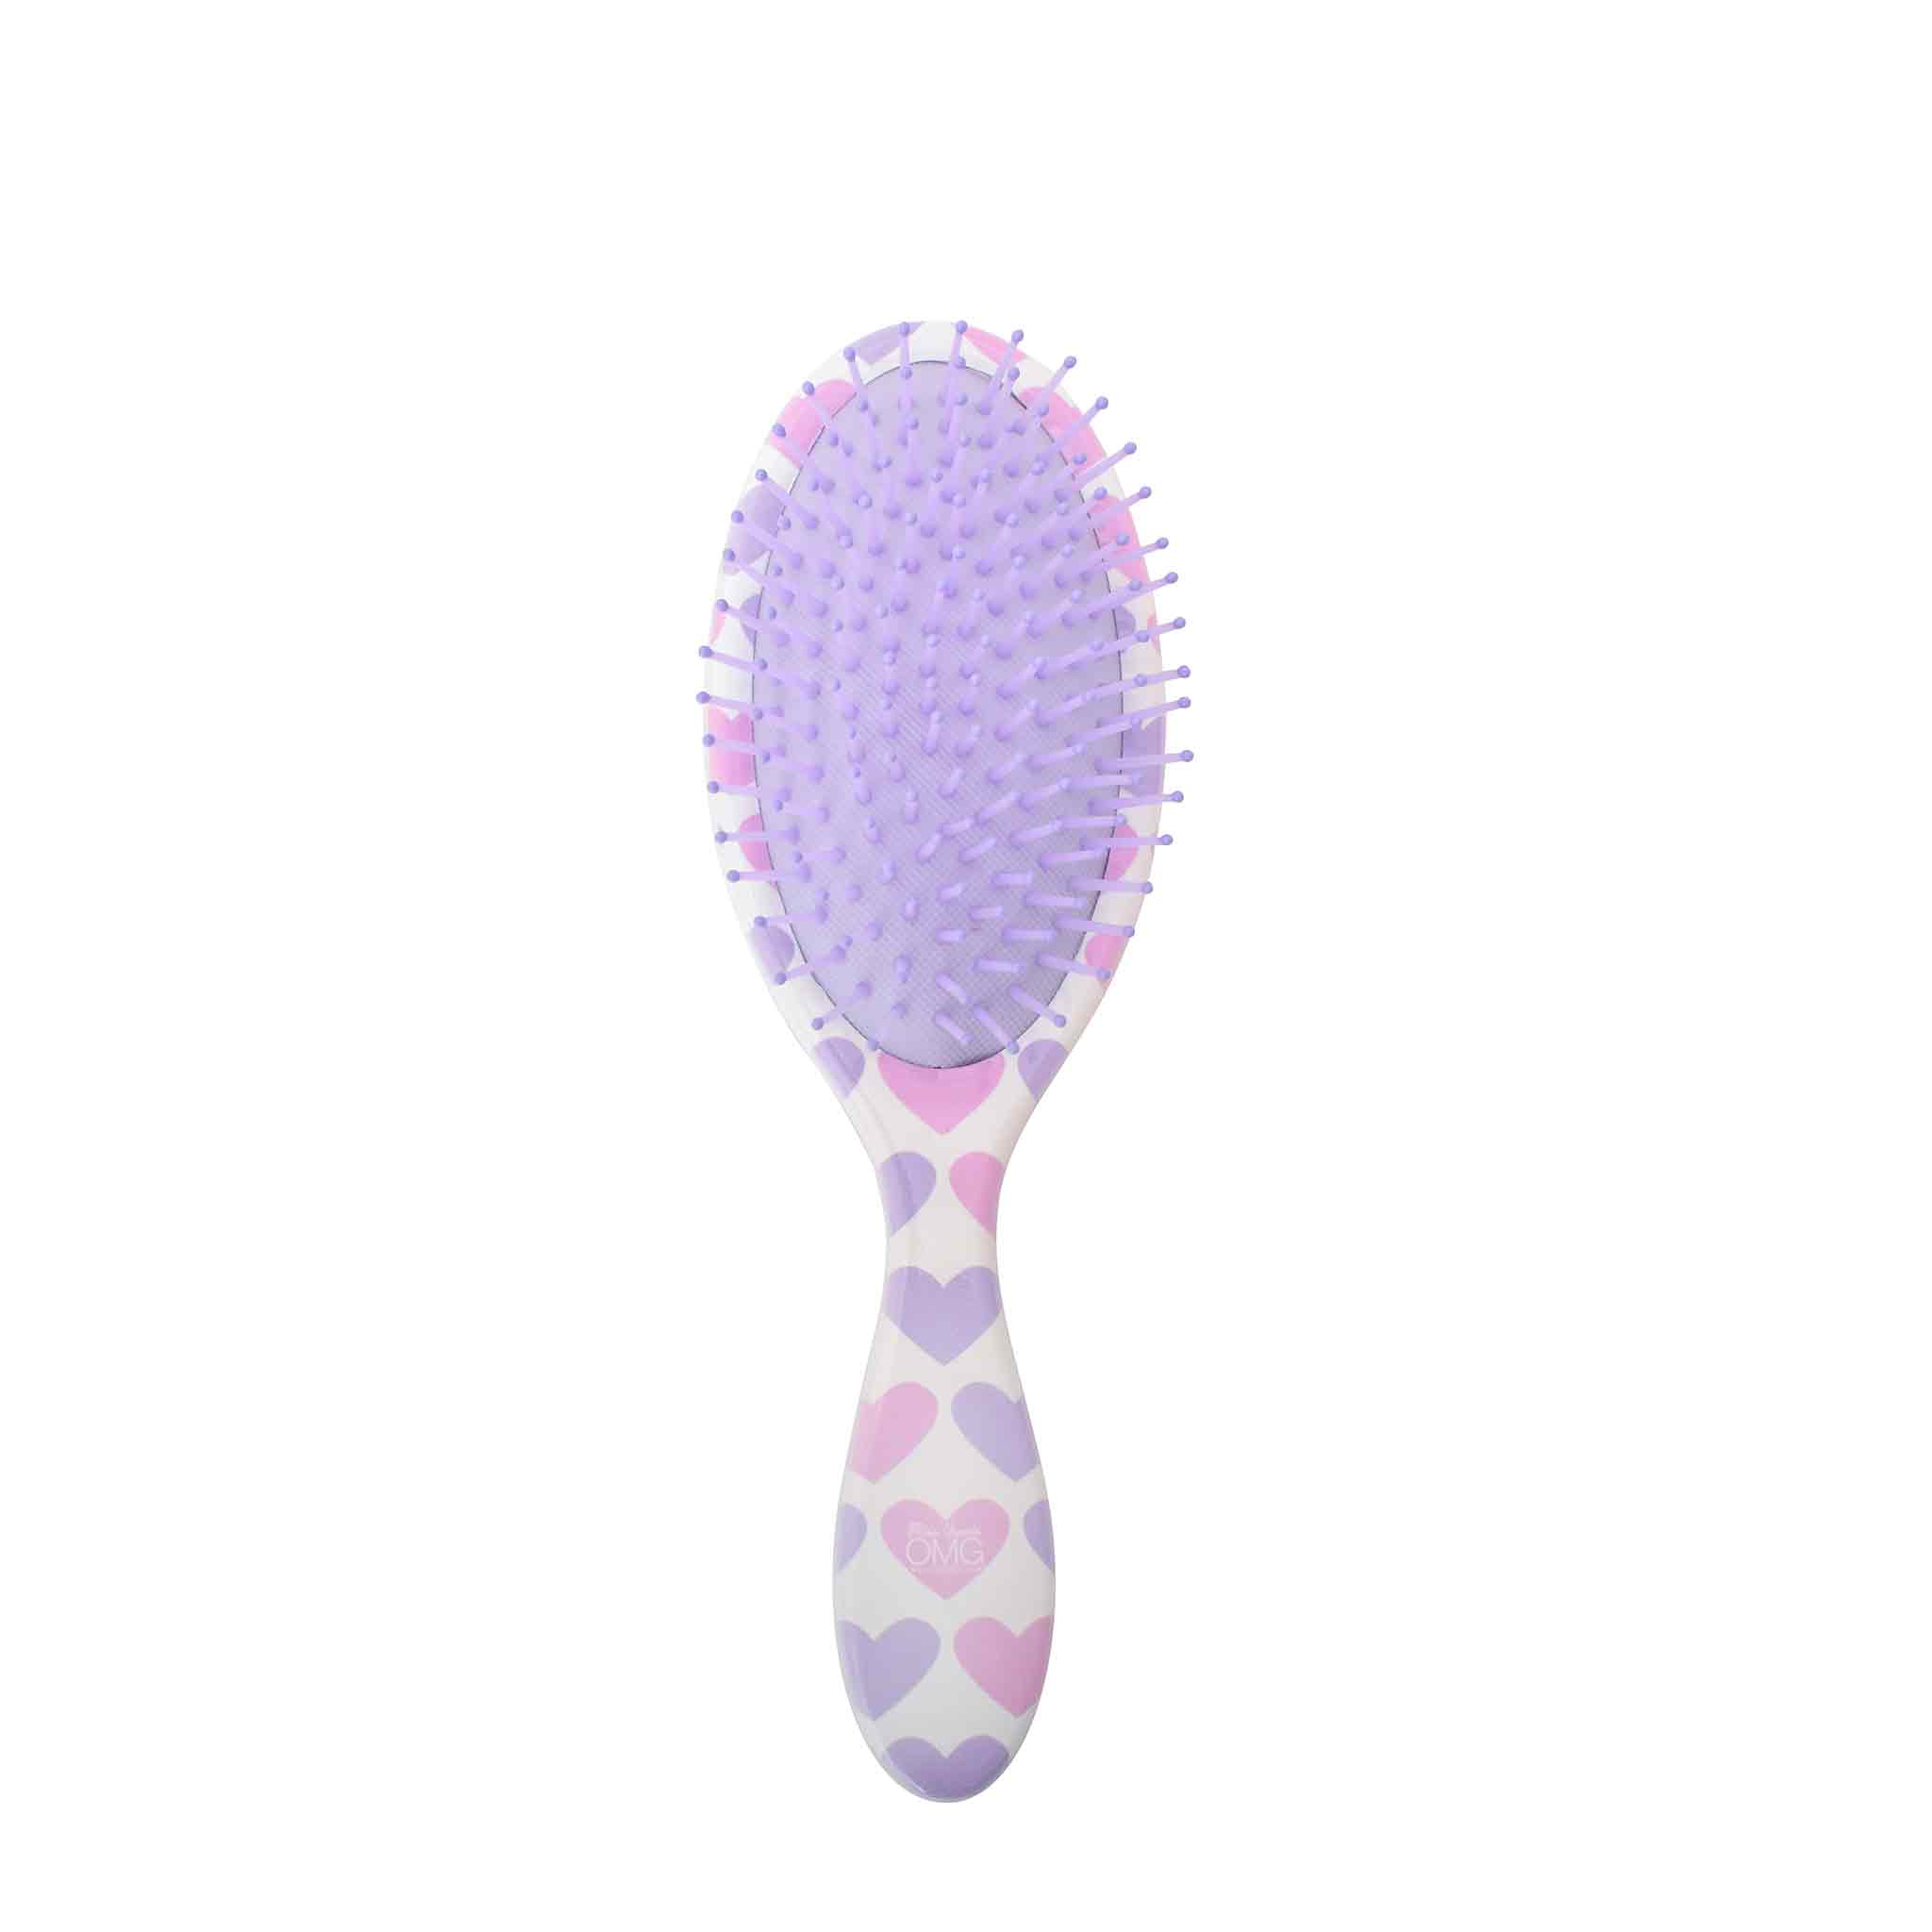 Back view of 'Glam' heart-printed round hairbrush